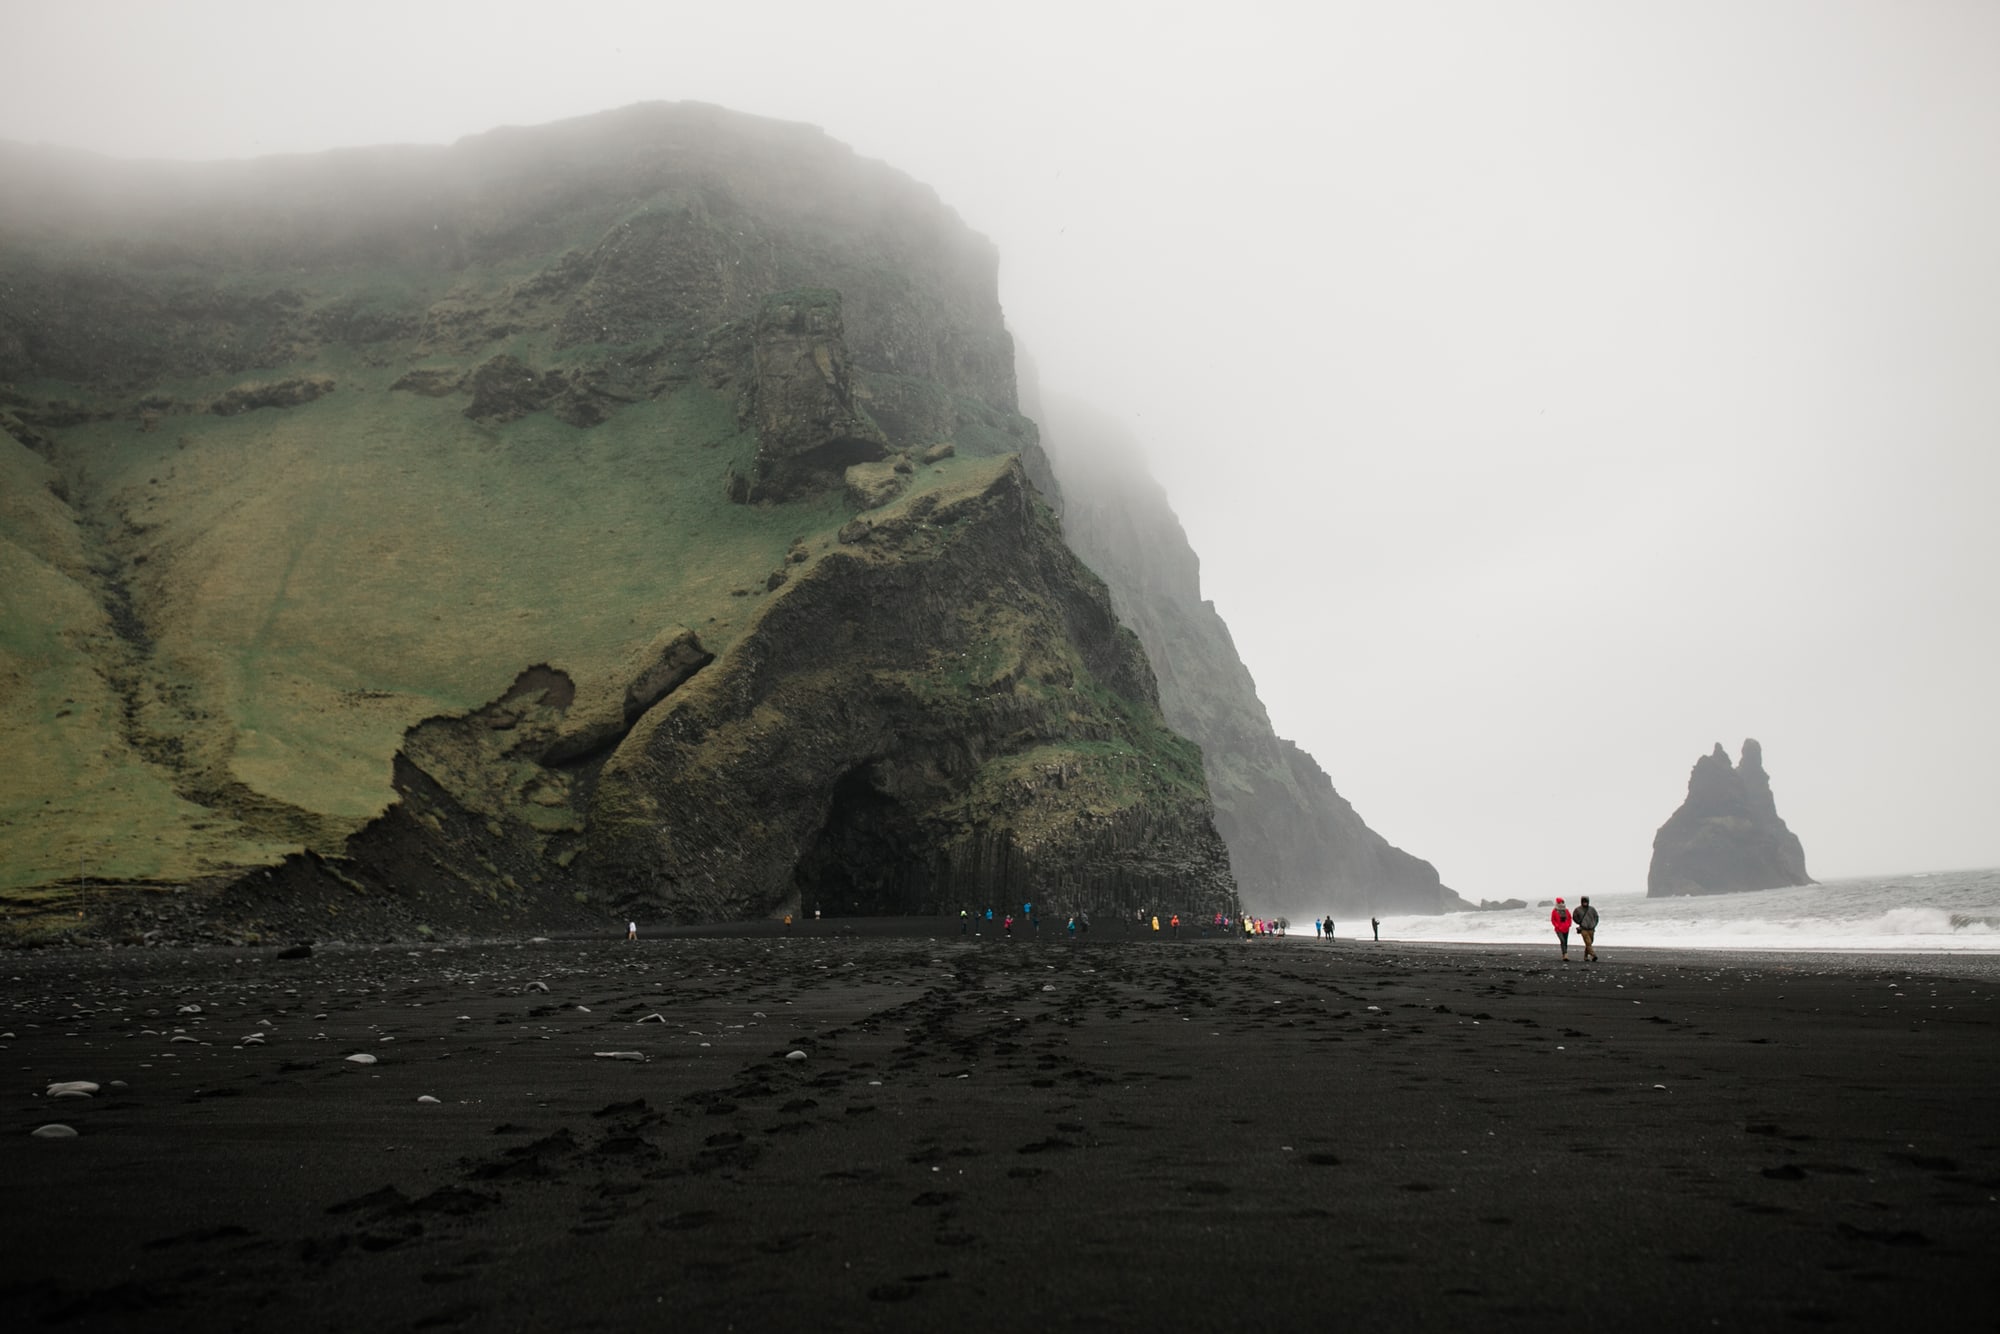 Part II of my epic icelandic road trip features the famed southern reagion of Iceland; black sand beaches, staggering waterfalls, and geothermal wonders.